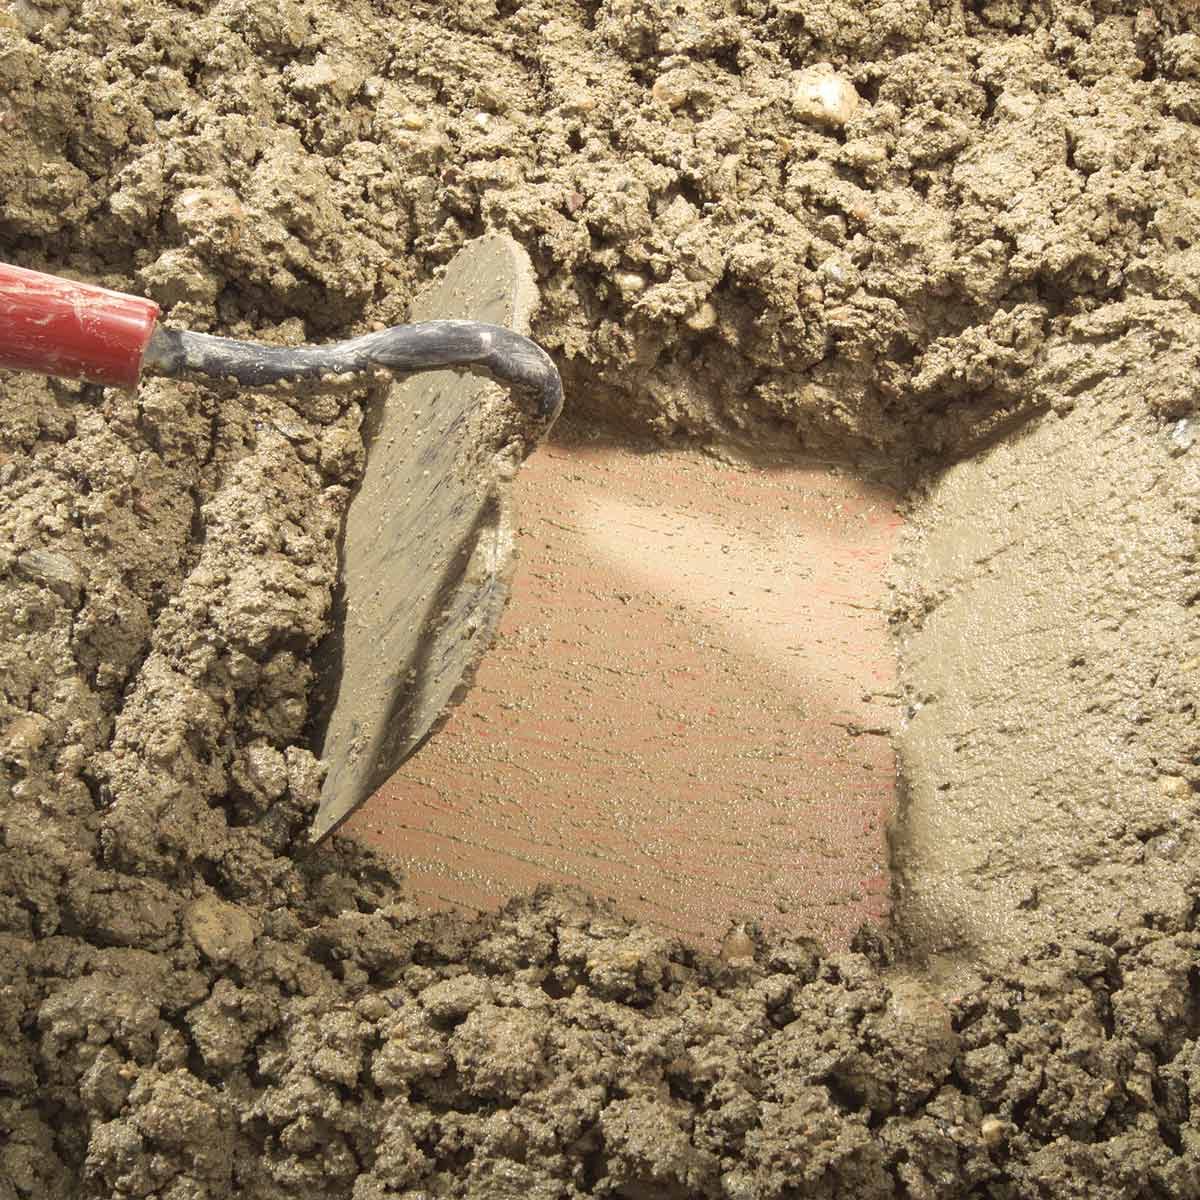 How to Properly Mix Concrete